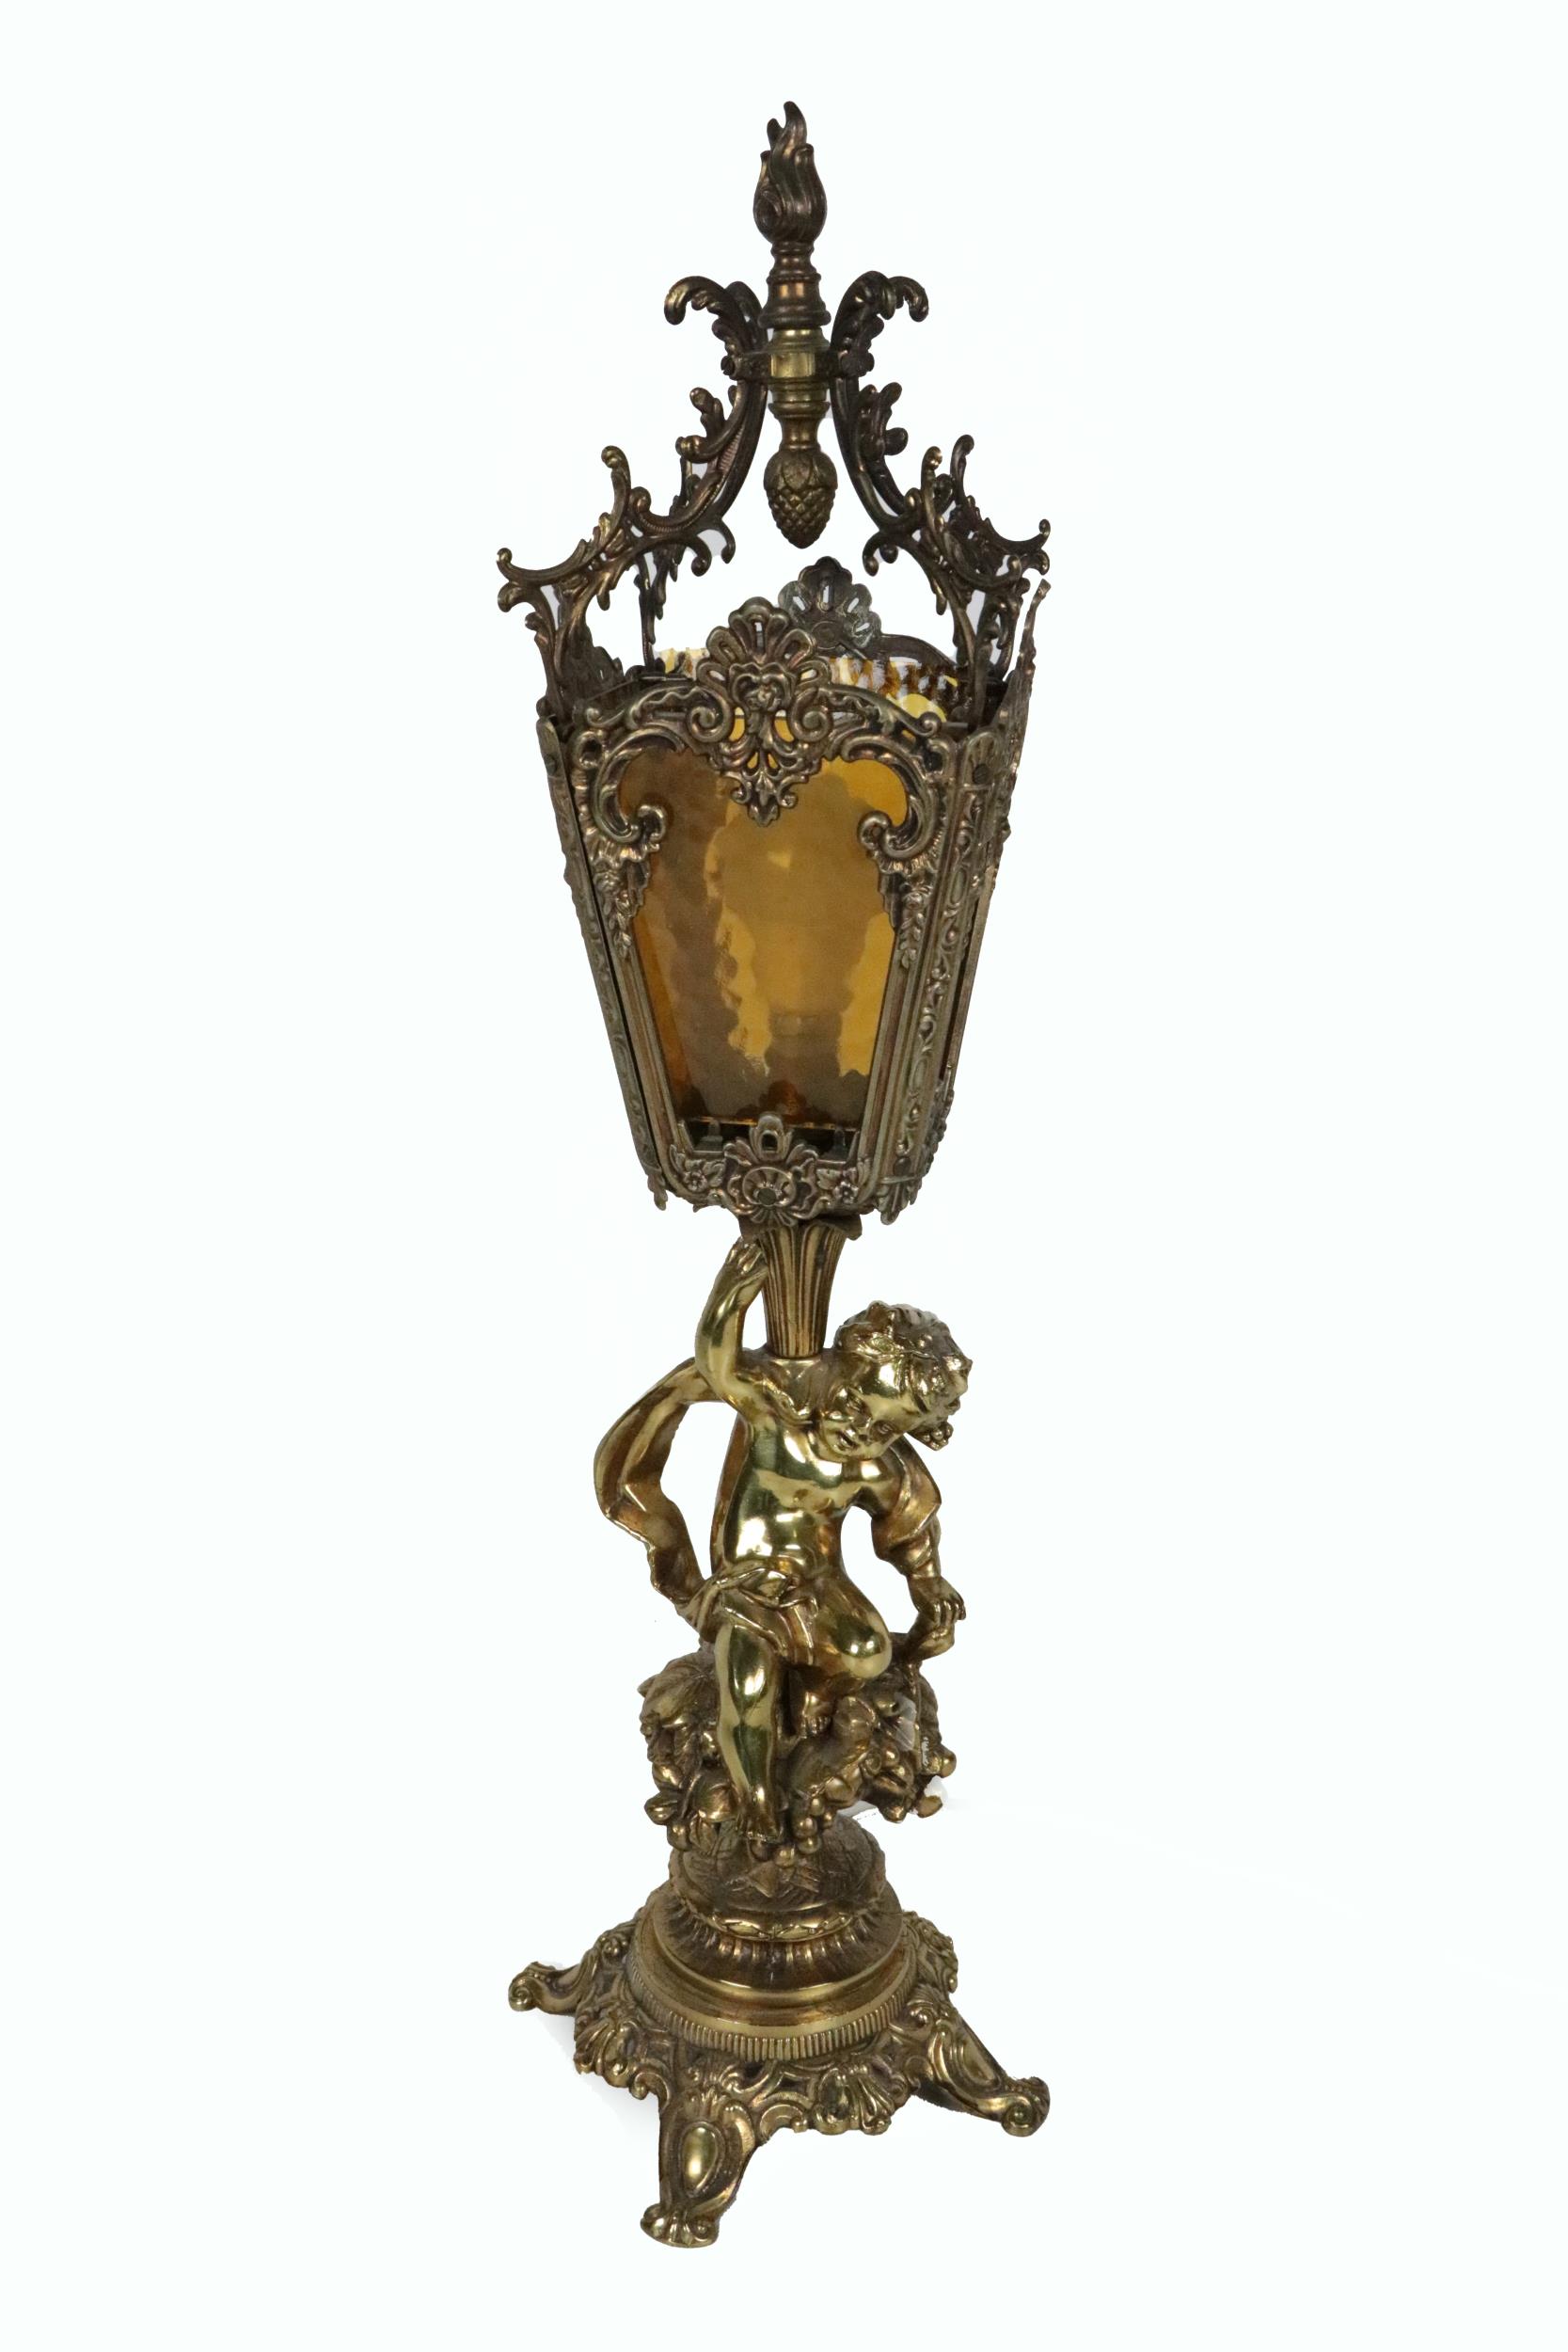 A 19th Century brass Lantern Lamp, with coloured glass and decorative ormolu shade, with cherub